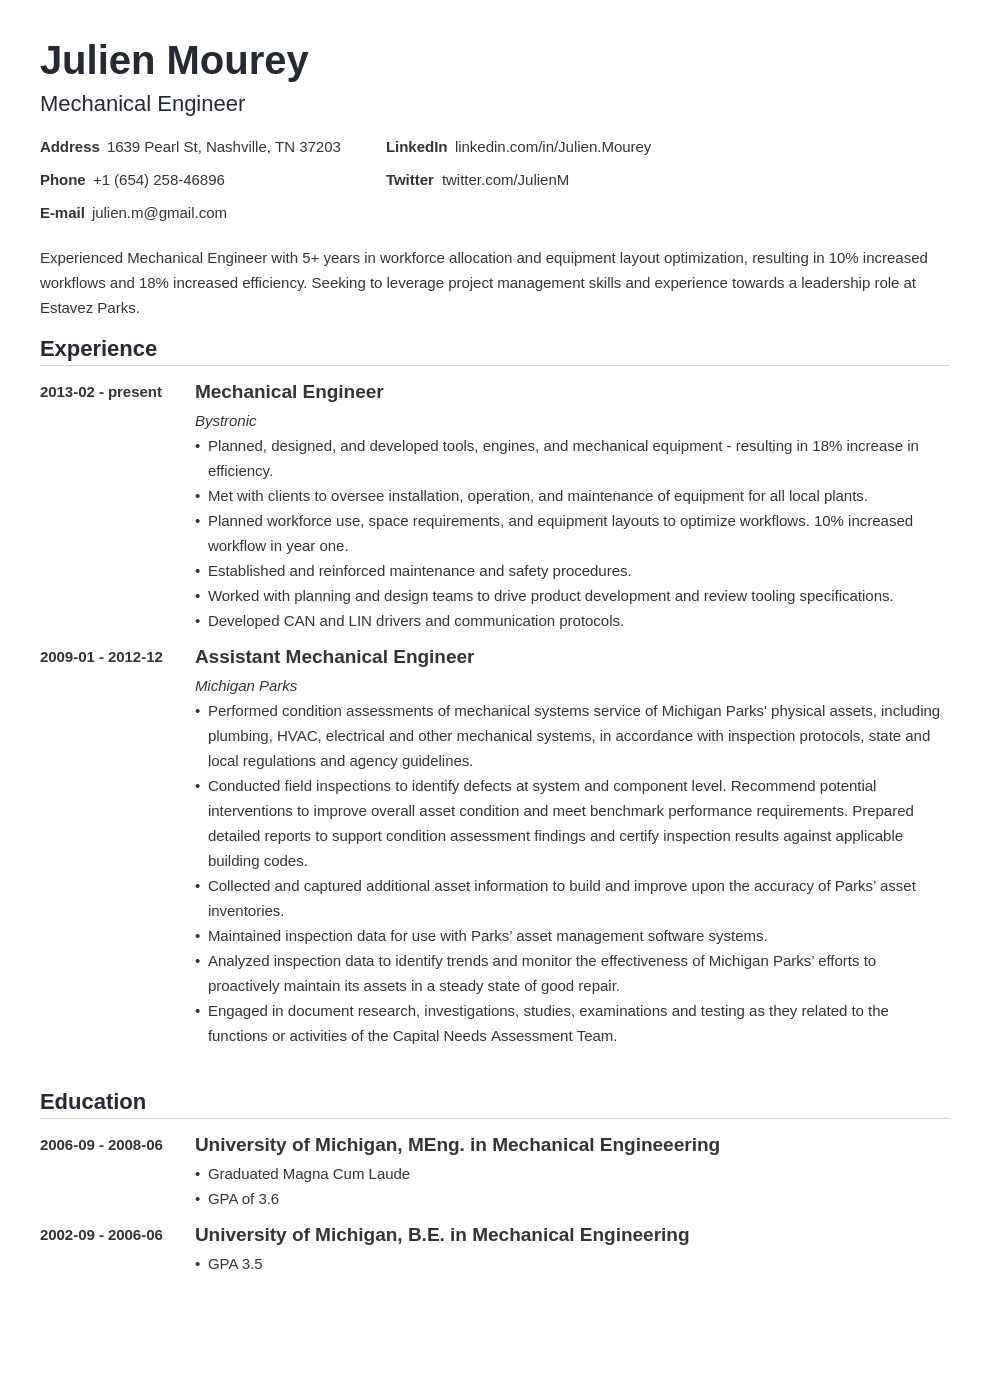 Mechanical Engineer Resume Examples (Template & Guide) Pertaining To Mechanical Engineer Job Description Template Throughout Mechanical Engineer Job Description Template